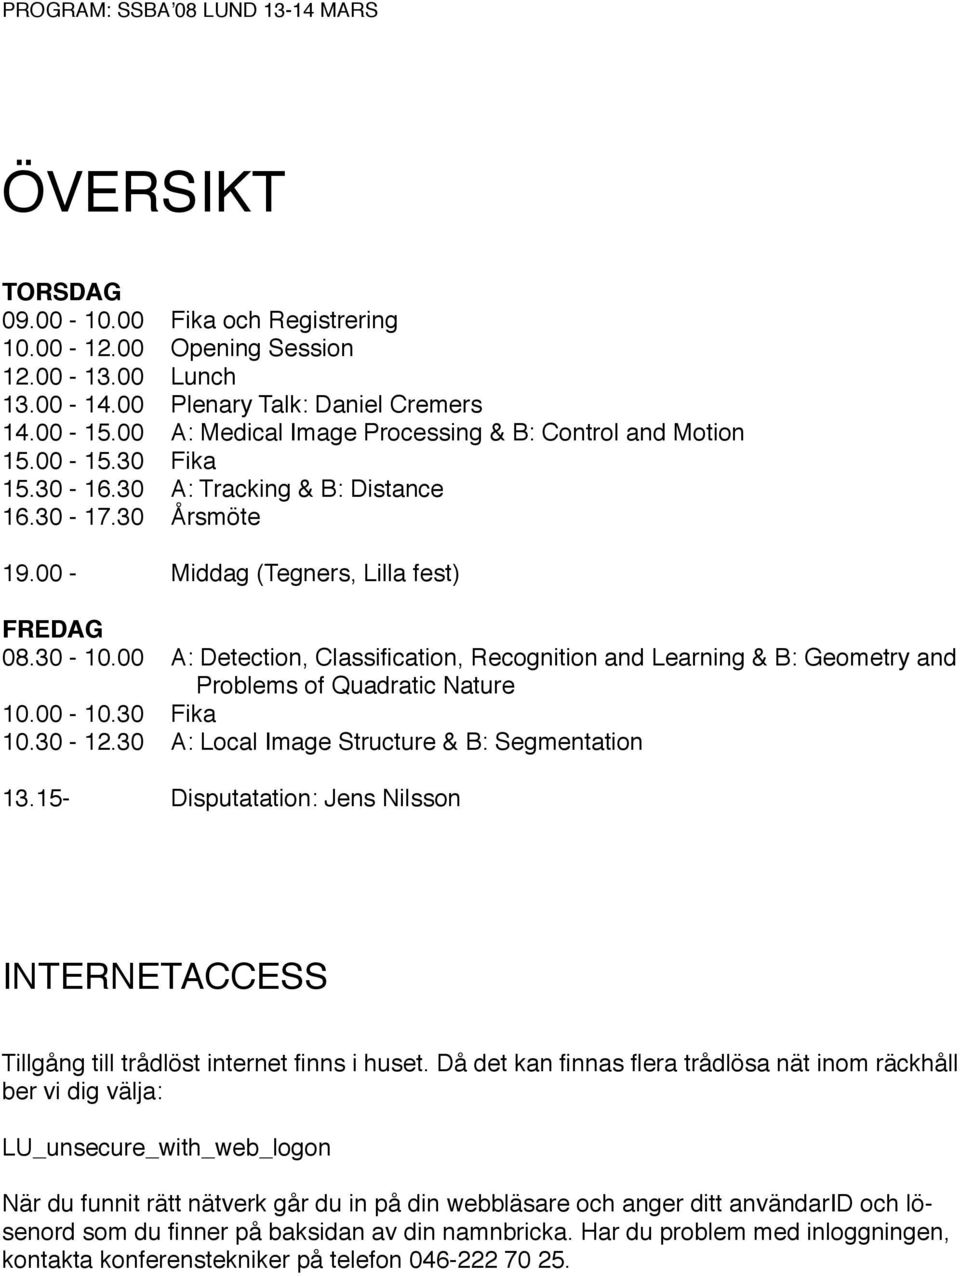 00 A: Detection, Classification, Recognition and Learning & B: Geometry and Problems of Quadratic Nature 10.00-10.30 Fika 10.30-12.30 A: Local Image Structure & B: Segmentation 13.